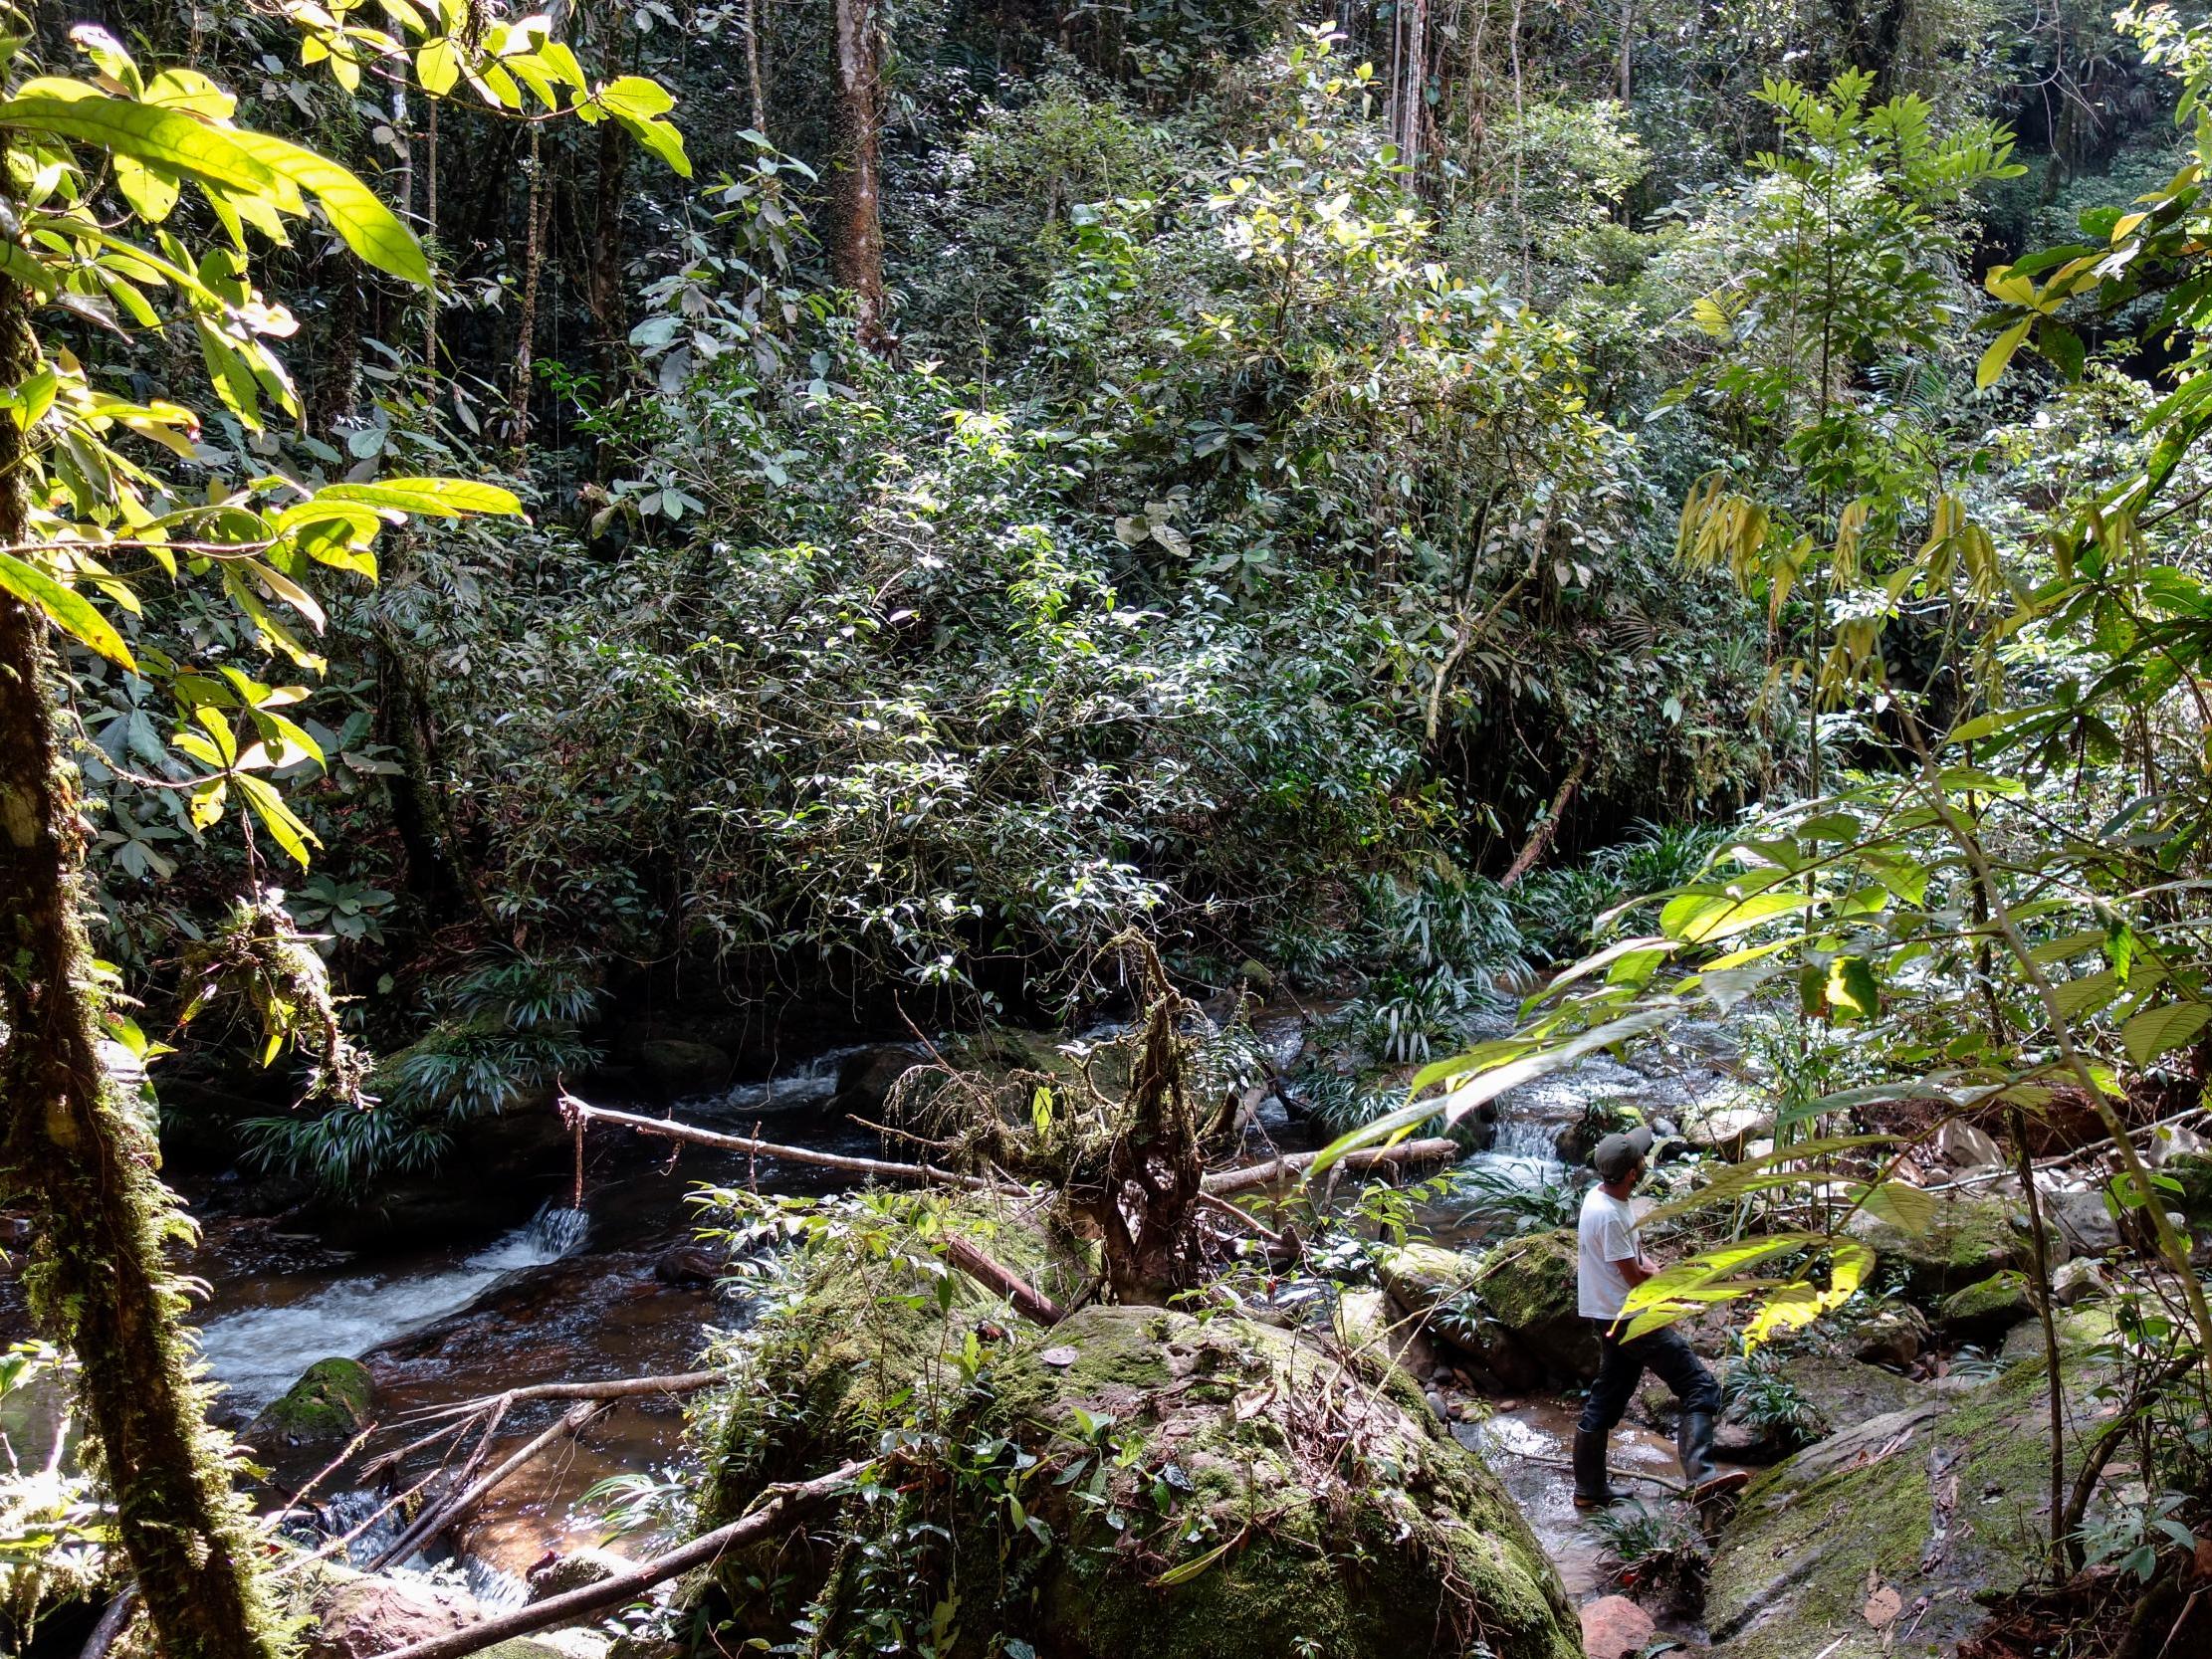 Colombia is the second most biodiverse nation in the world